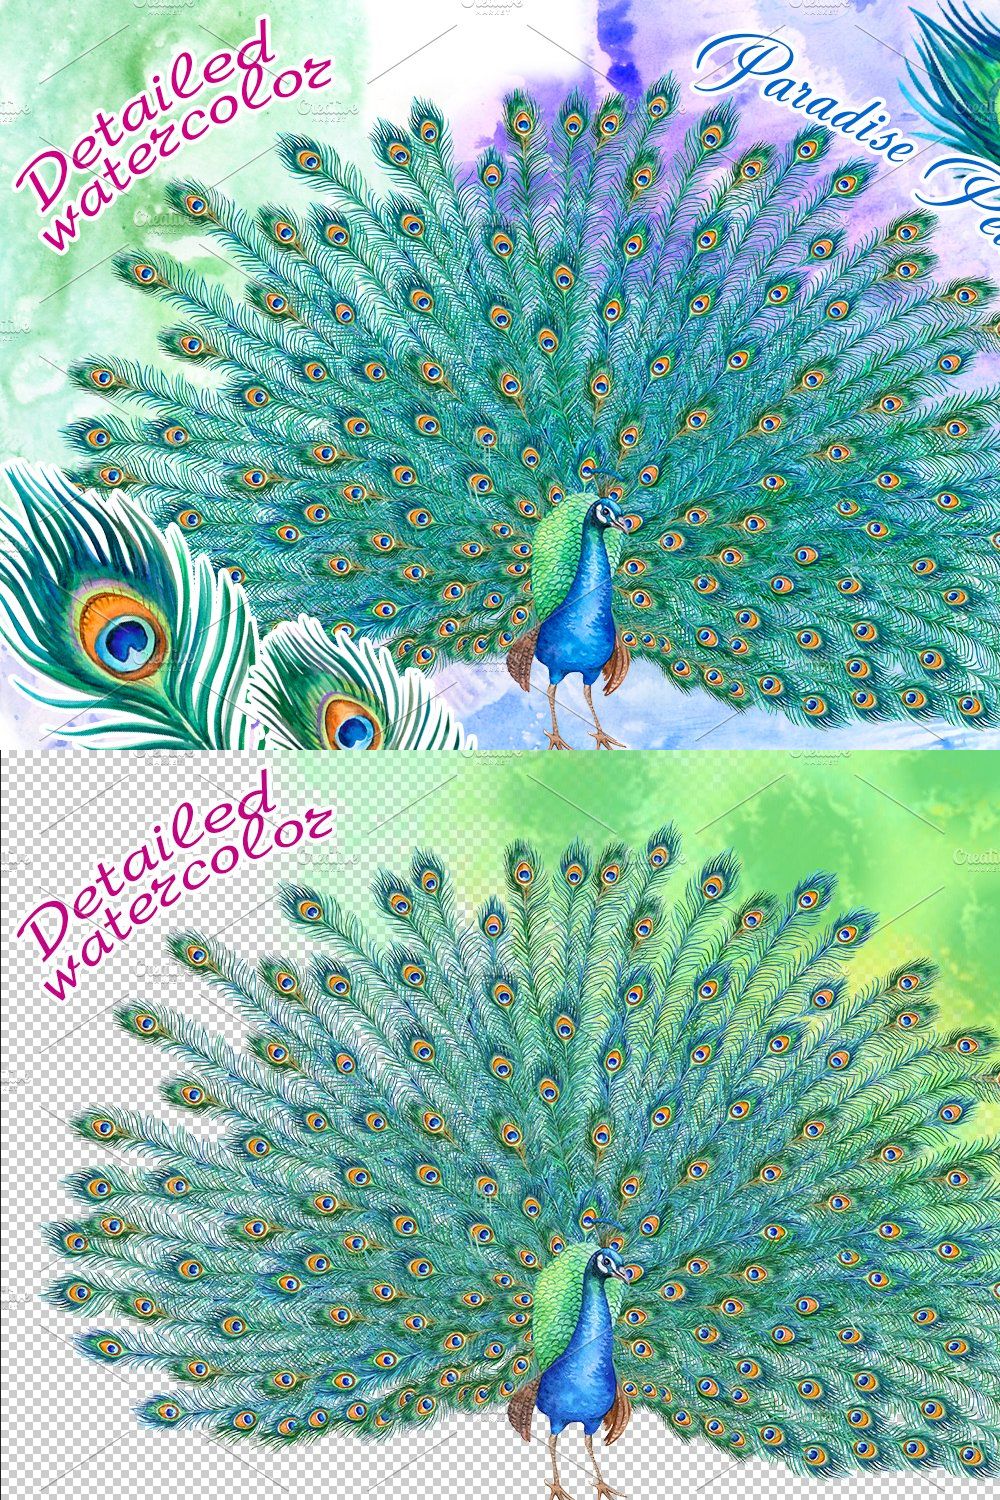 Peacock with a lush tail pinterest preview image.